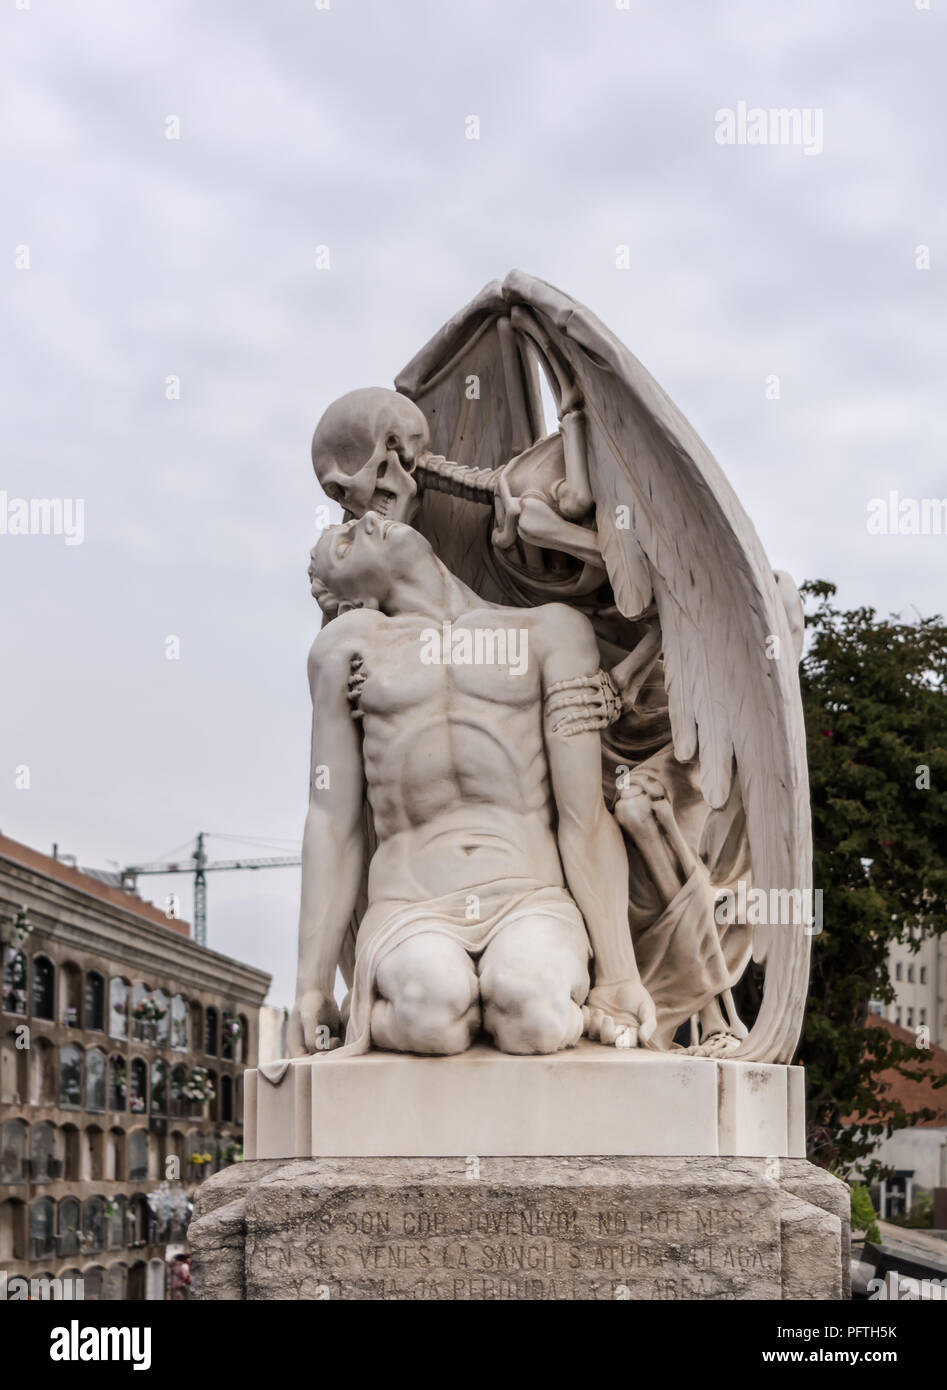 The Kiss of Death statue in Poblenou Cemetery in Barcelona. This marble sculpture depicts death, as a winged skeleton, kissing a handsome young man. T Stock Photo